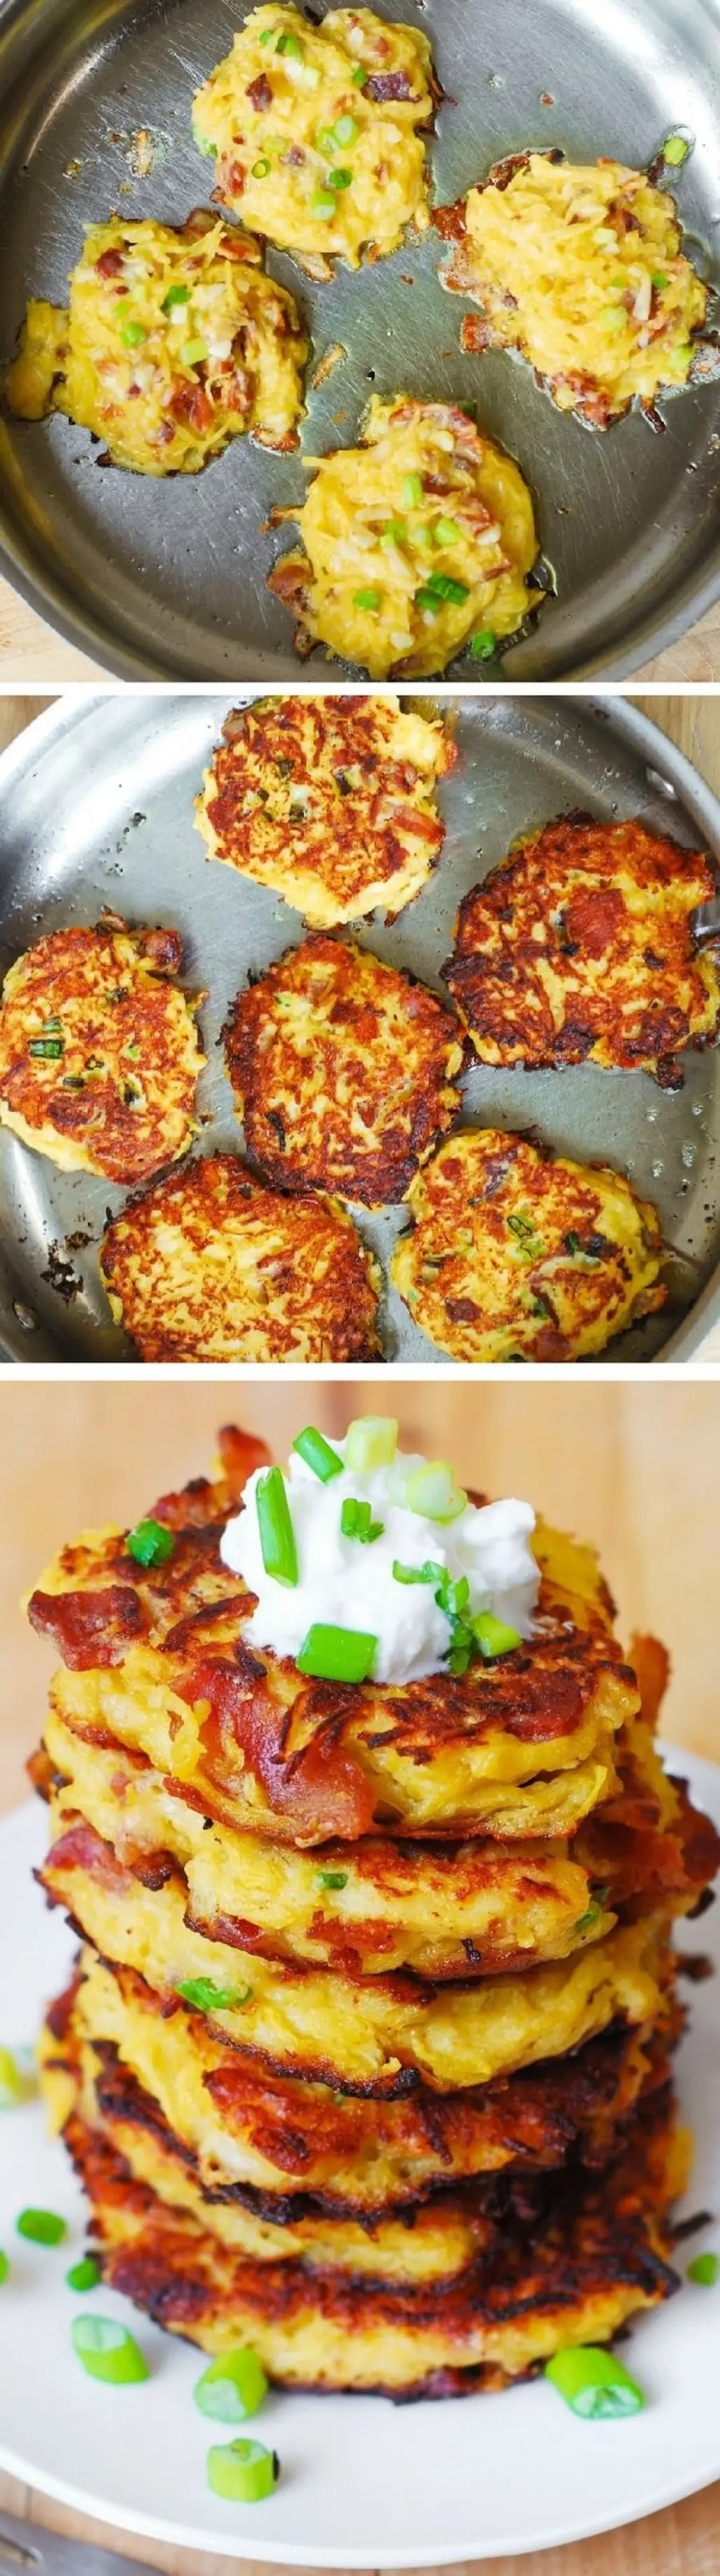 Bacon, Spaghetti Squash and Parmesan Fritters